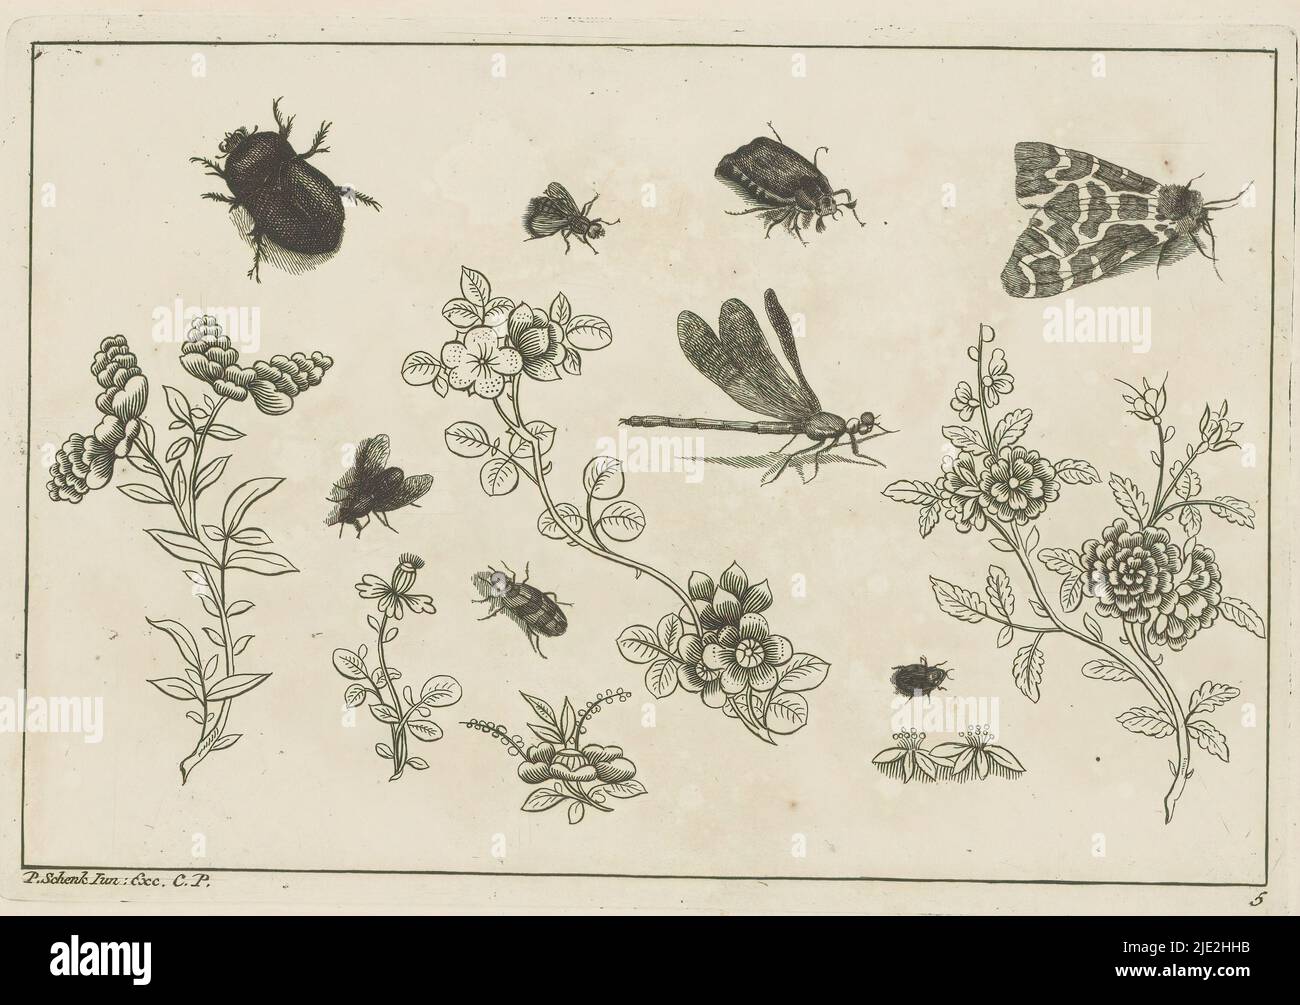 Flower branches with insects, Chinese flowers and insects (series title), Flower branches with various insects, including a fly, beetle and moth. Print is part of an album., print maker: Pieter Schenk (II), after design by: Pieter Schenk (II), publisher: Pieter Schenk (II), (mentioned on object), print maker: Amsterdam, publisher: Leipzig, 1727 - 1775, paper, etching, height 167 mm × width 244 mm Stock Photo